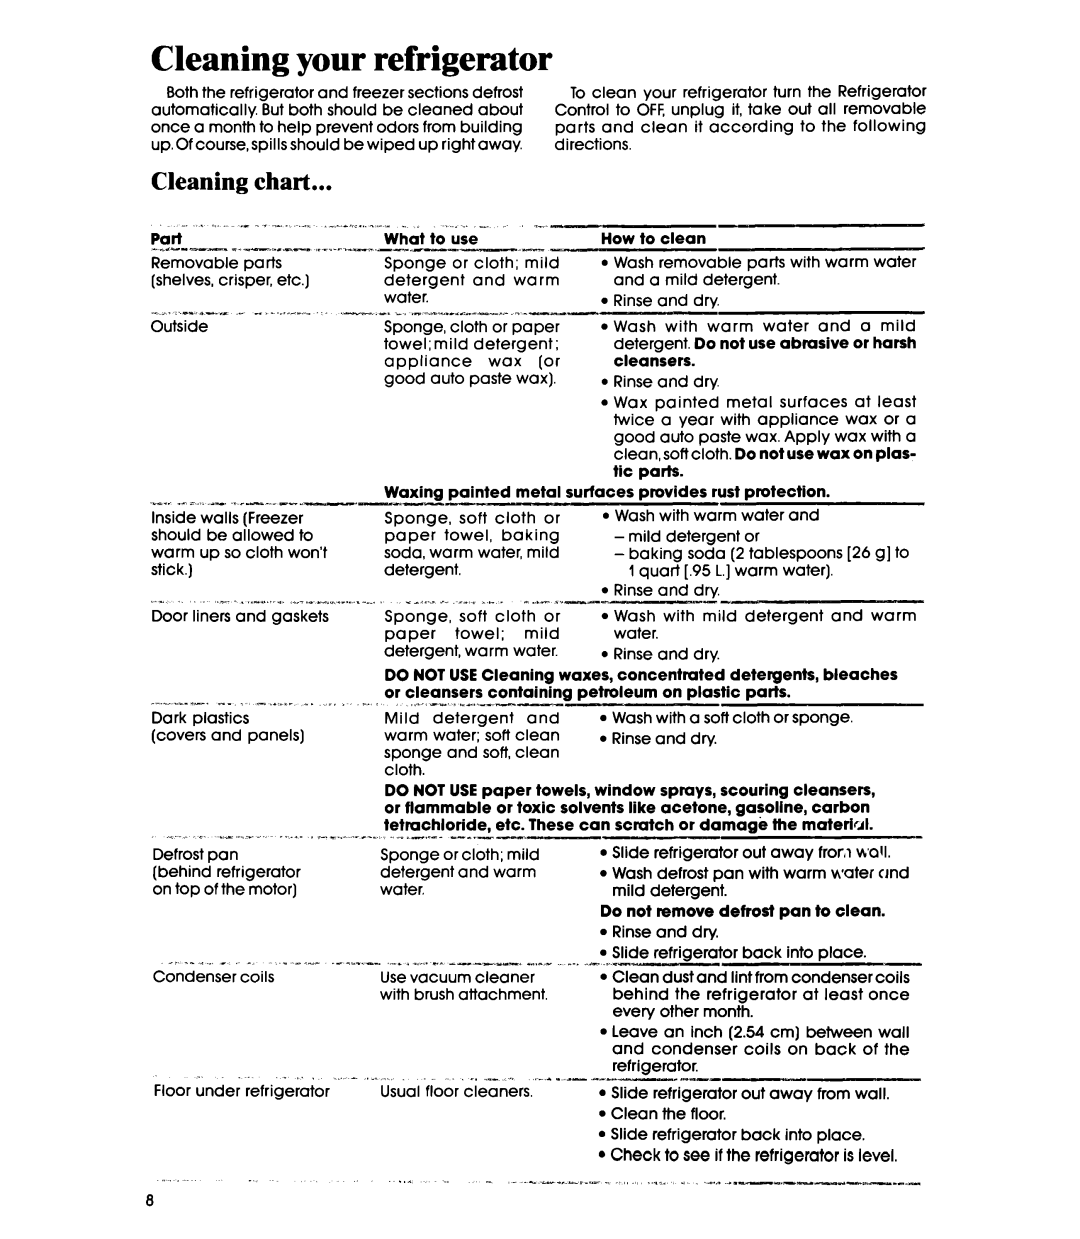 Whirlpool ETl8SK manual Cleaning chart, Cleaning your refrigerator 